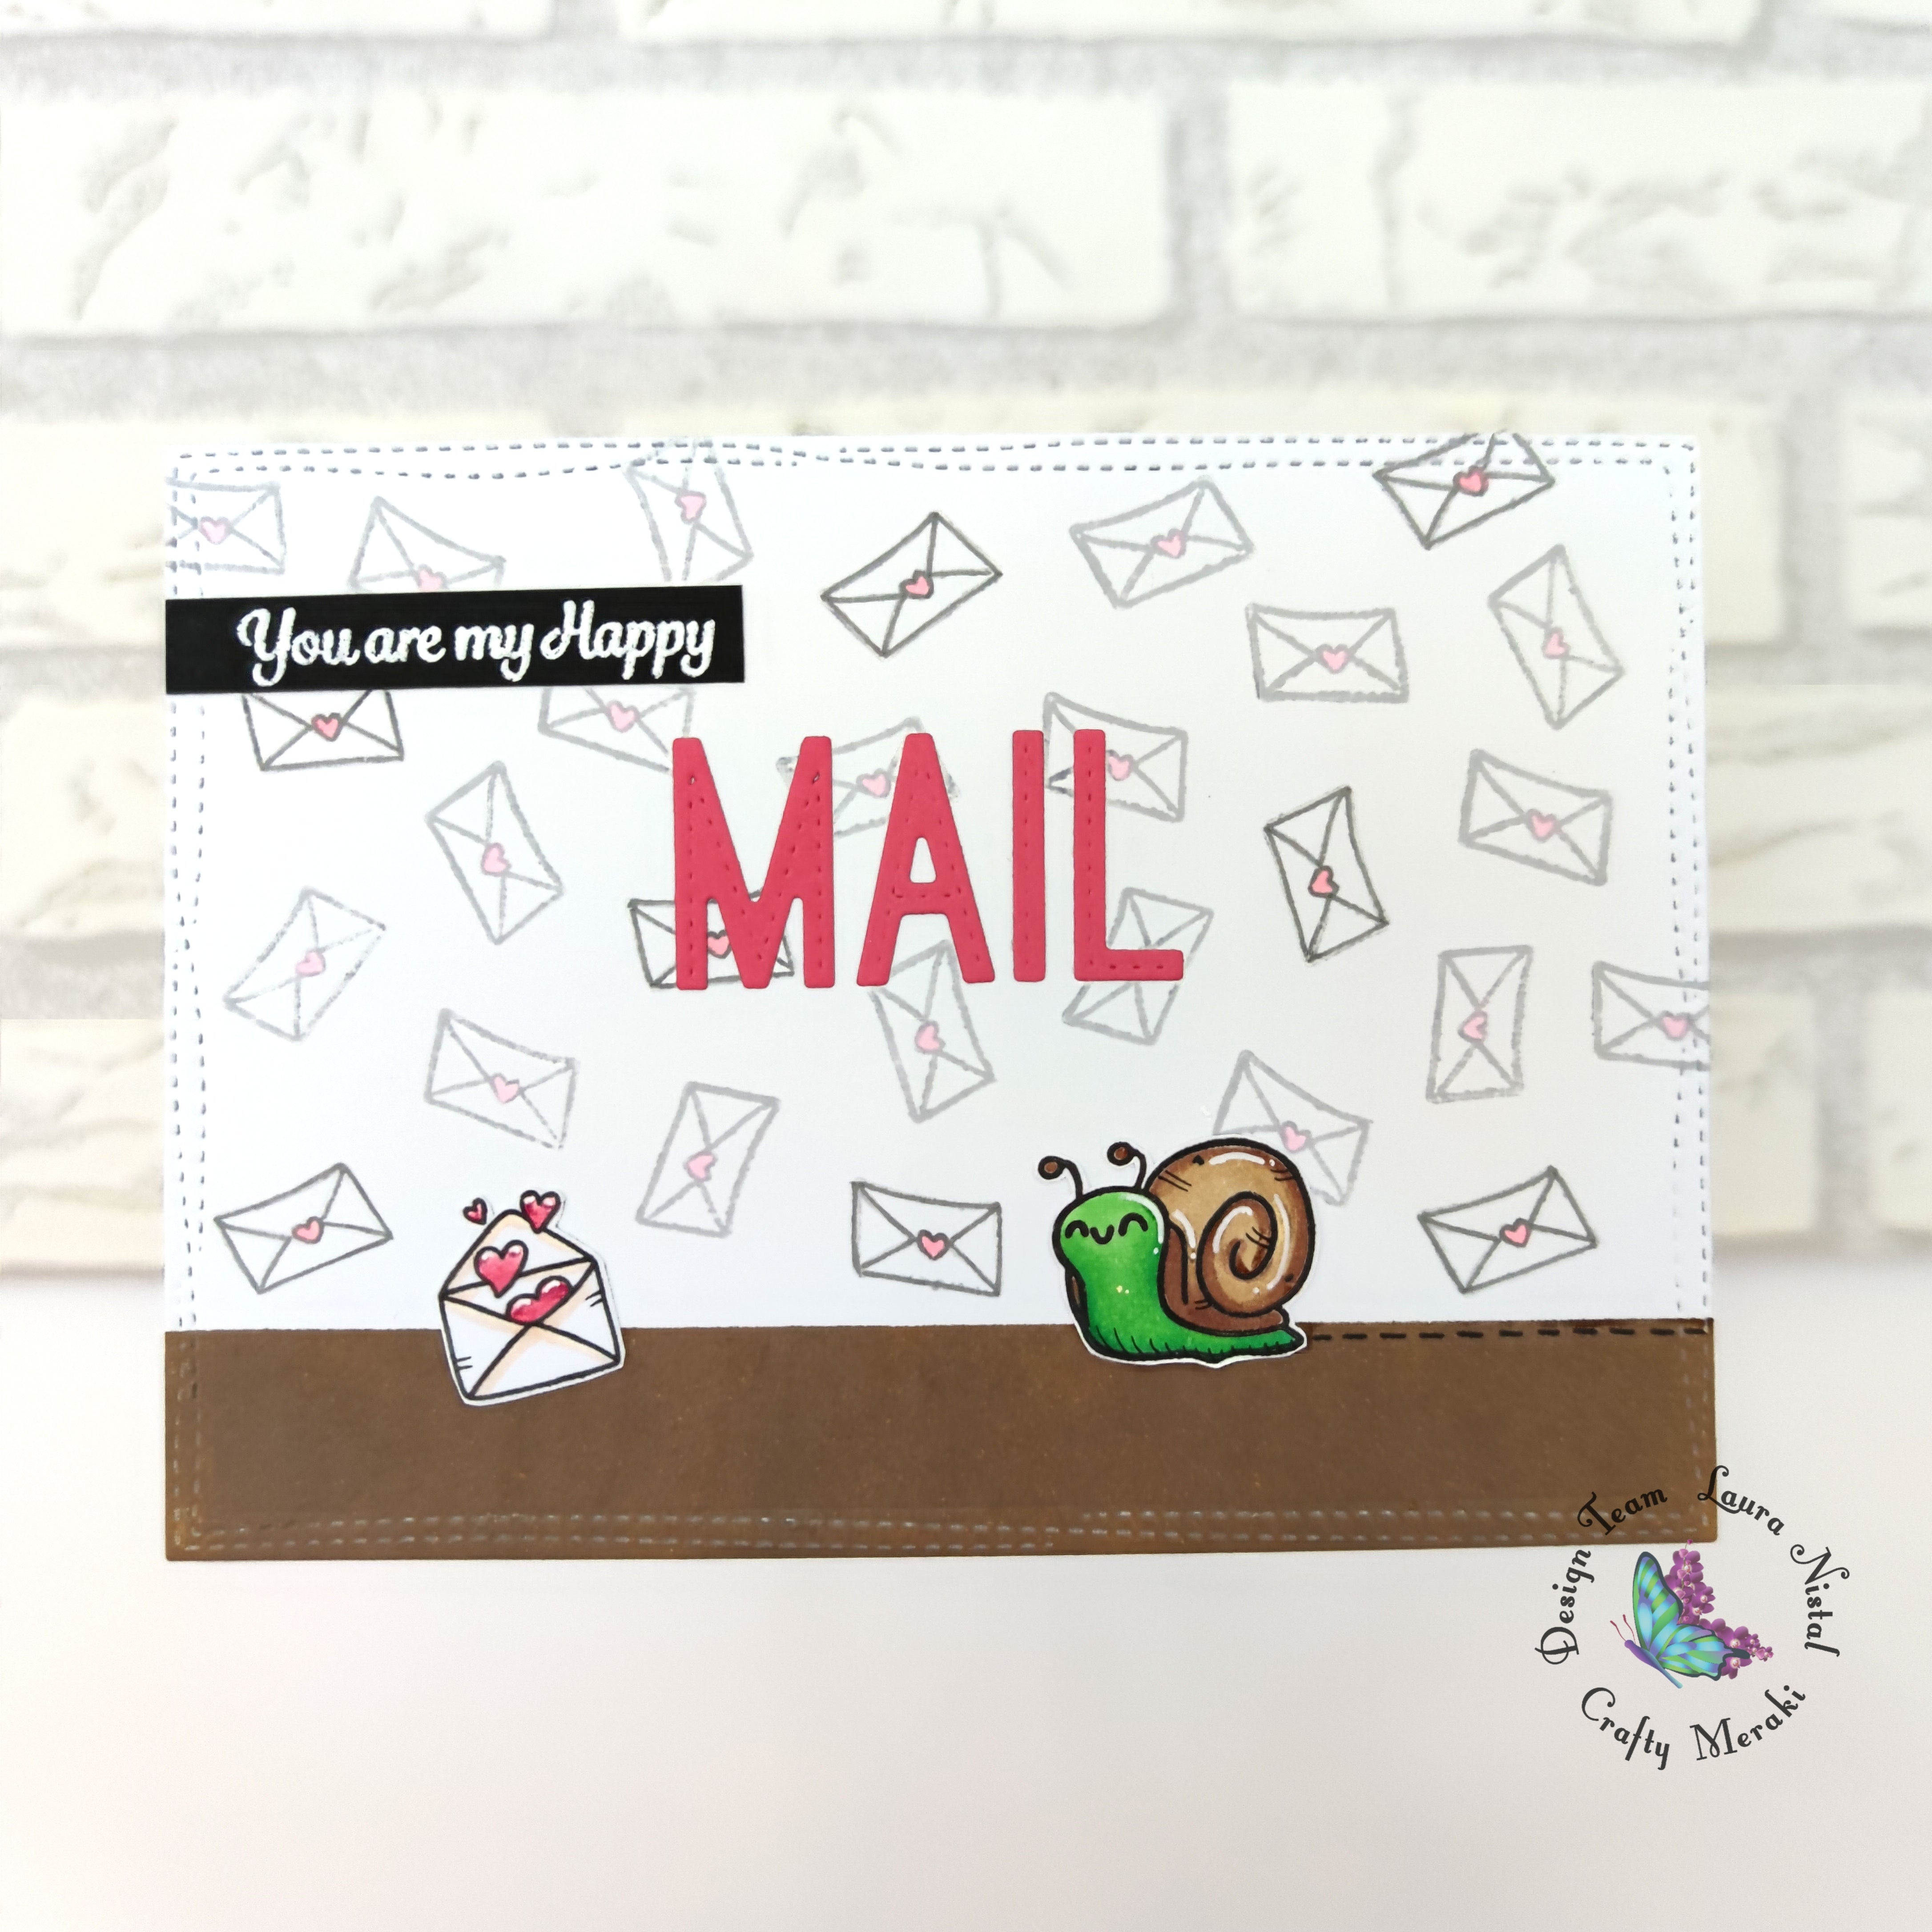 "You are my happy mail" by Laura